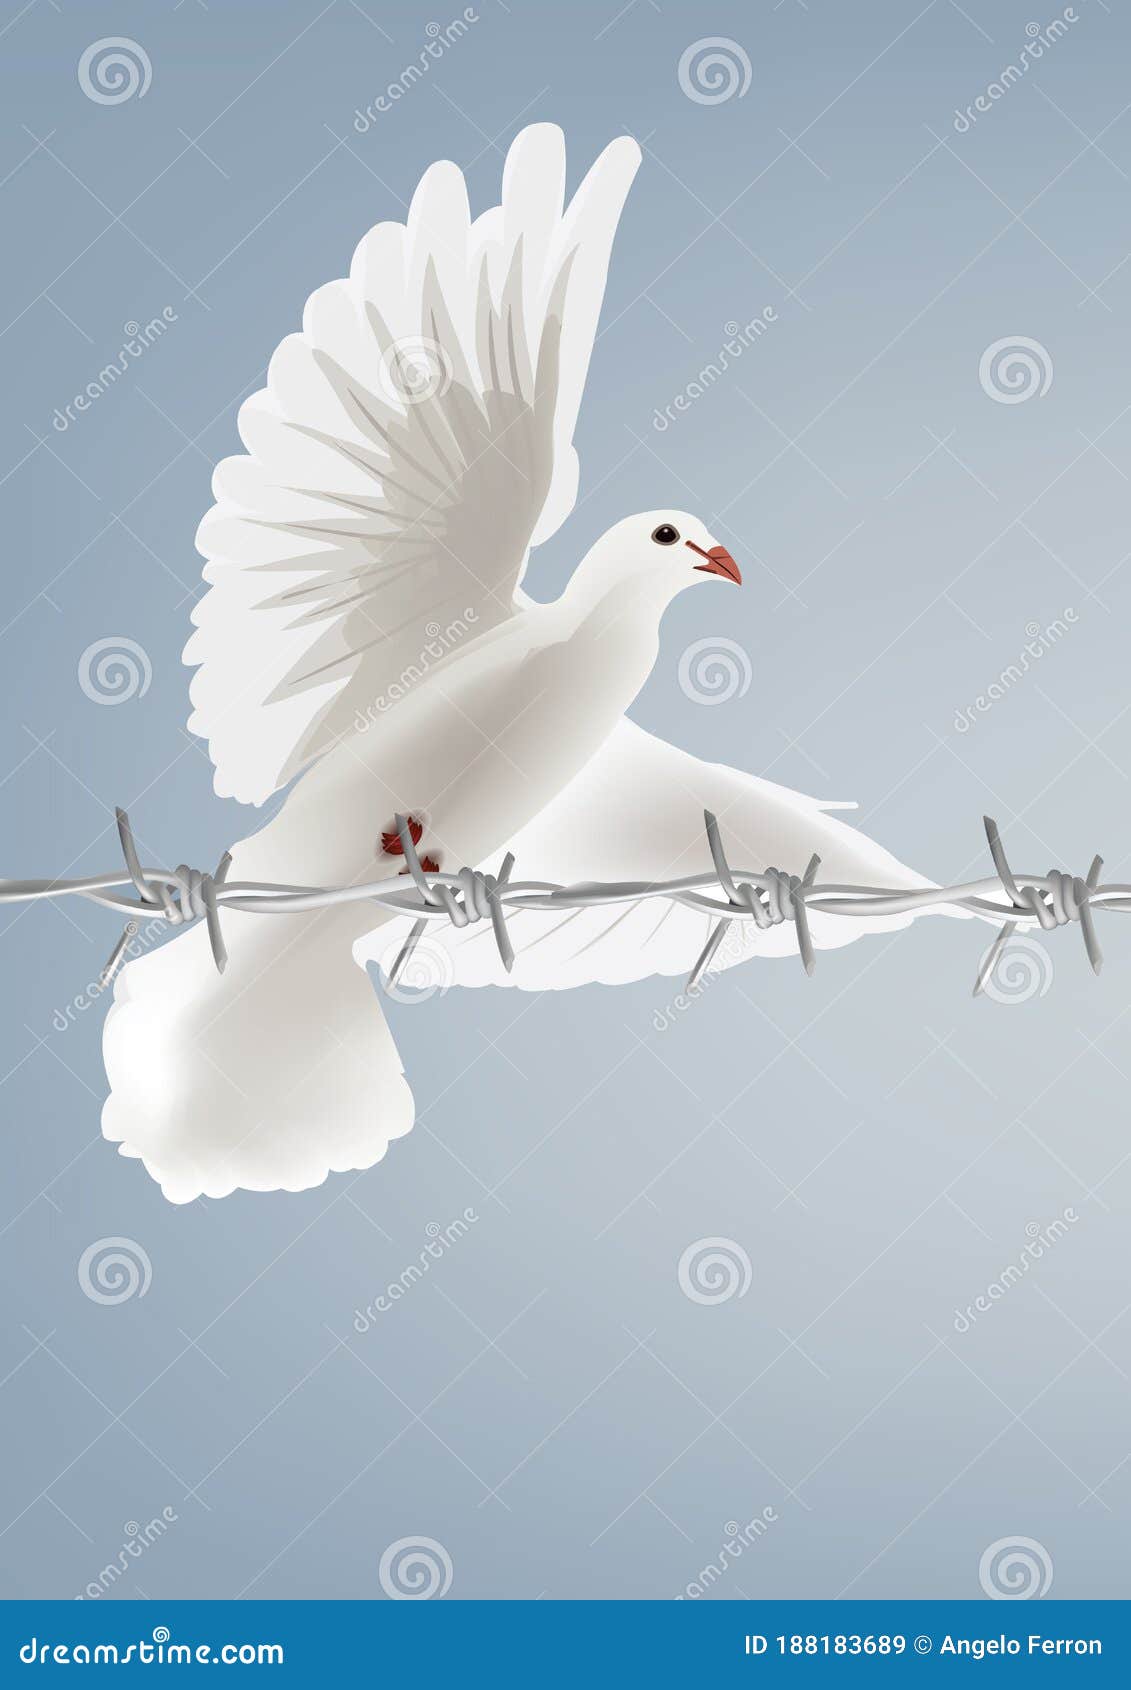 white dove bird in flight with piece of barbed wire